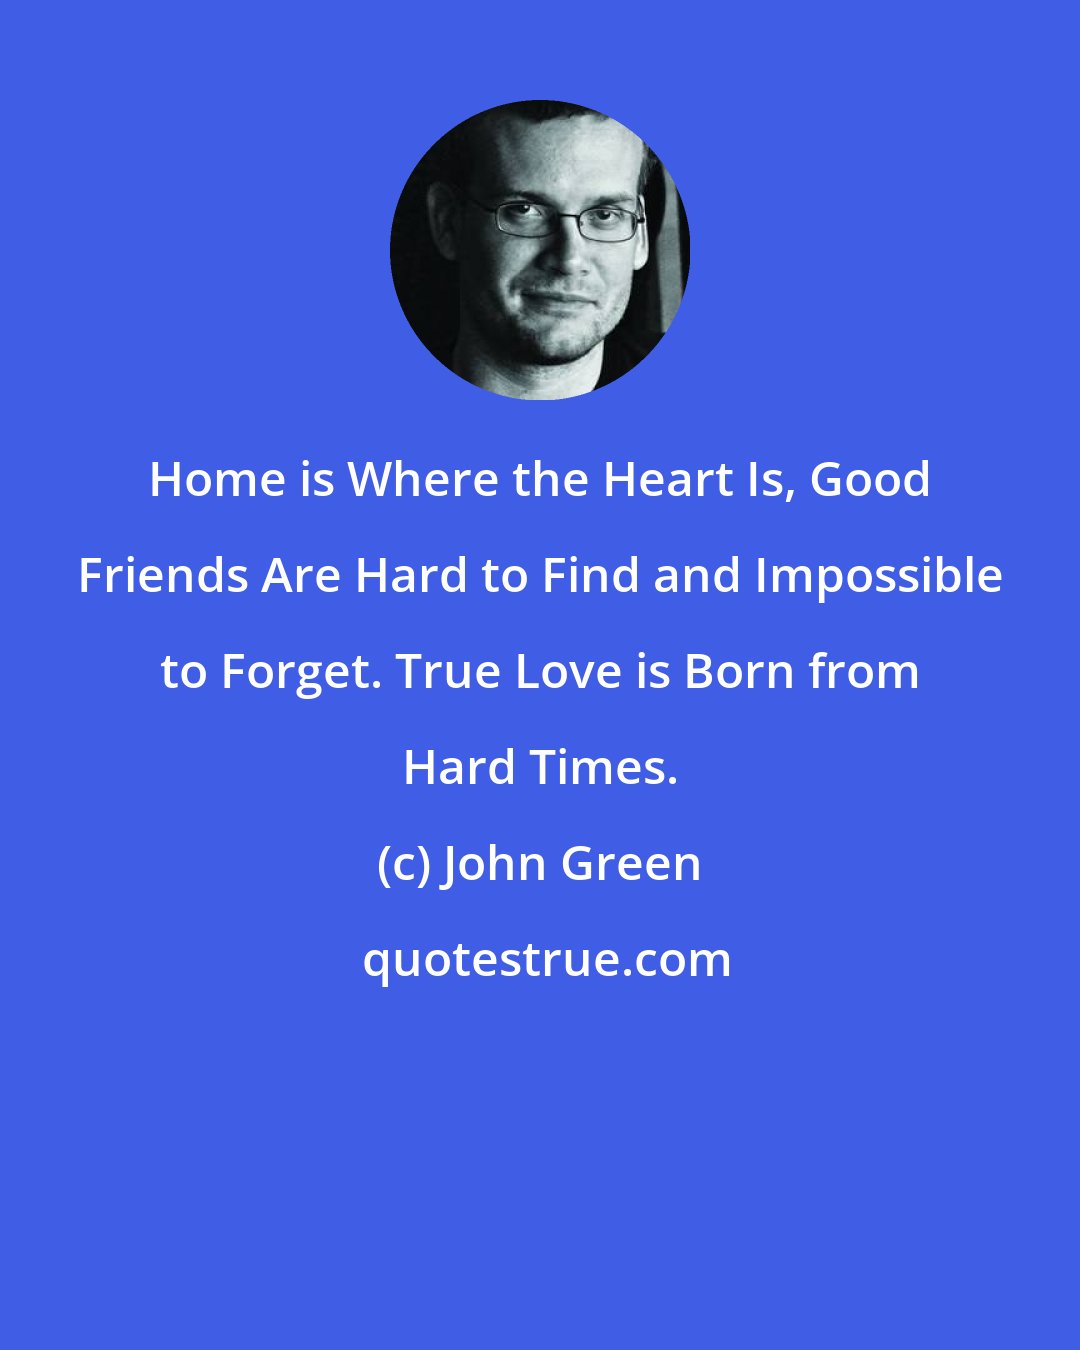 John Green: Home is Where the Heart Is, Good Friends Are Hard to Find and Impossible to Forget. True Love is Born from Hard Times.